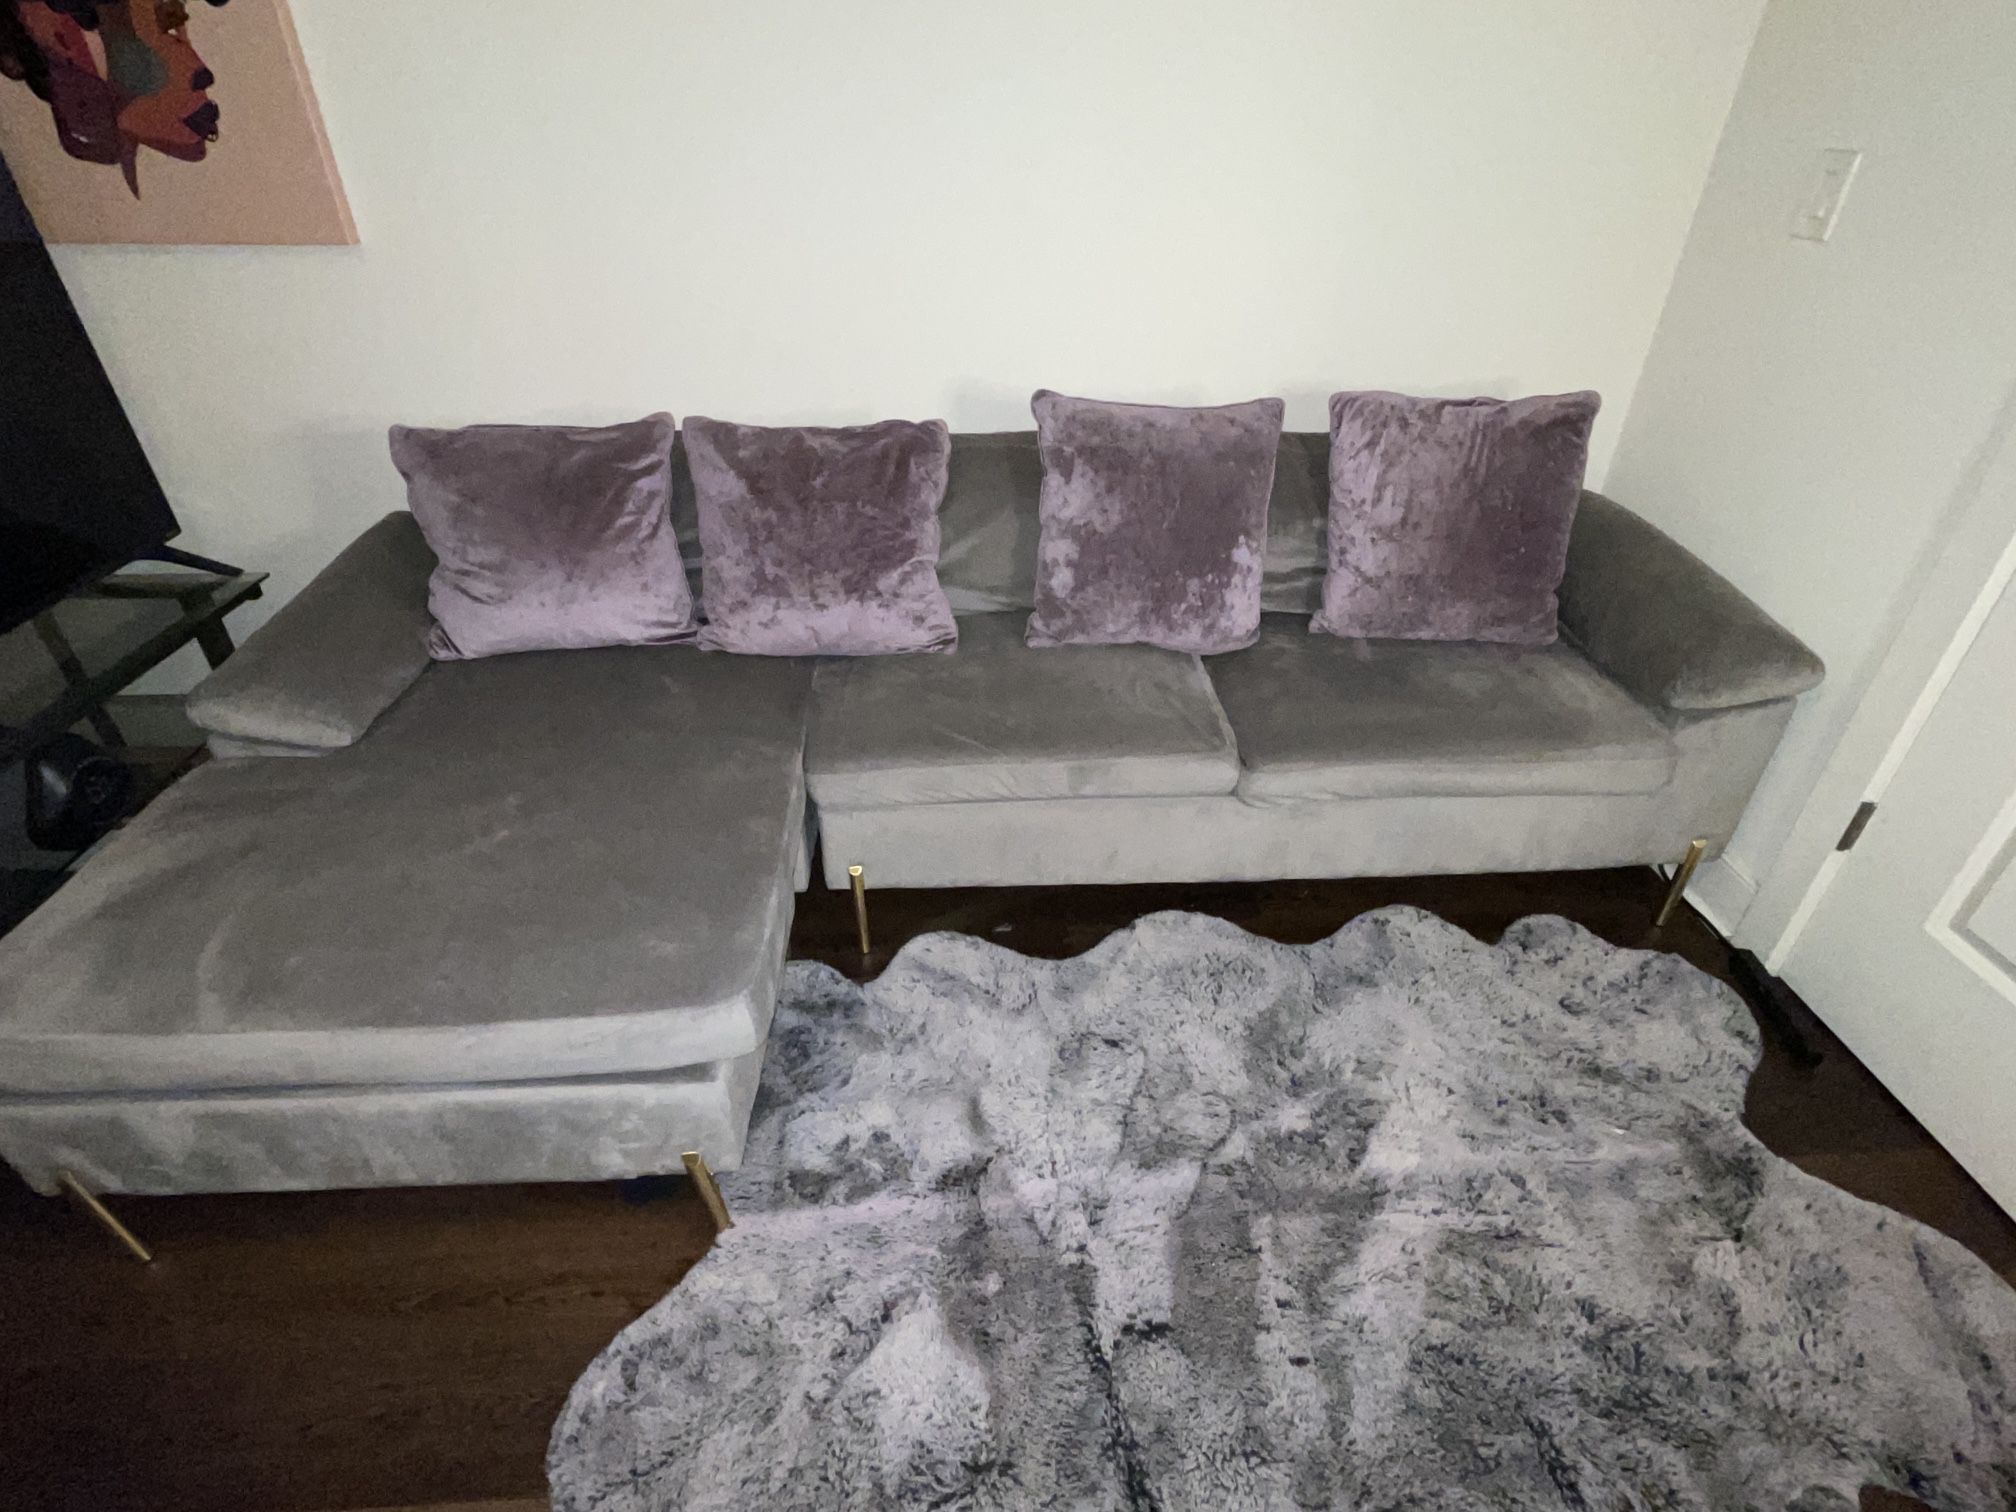 Sectional Couch For Sale